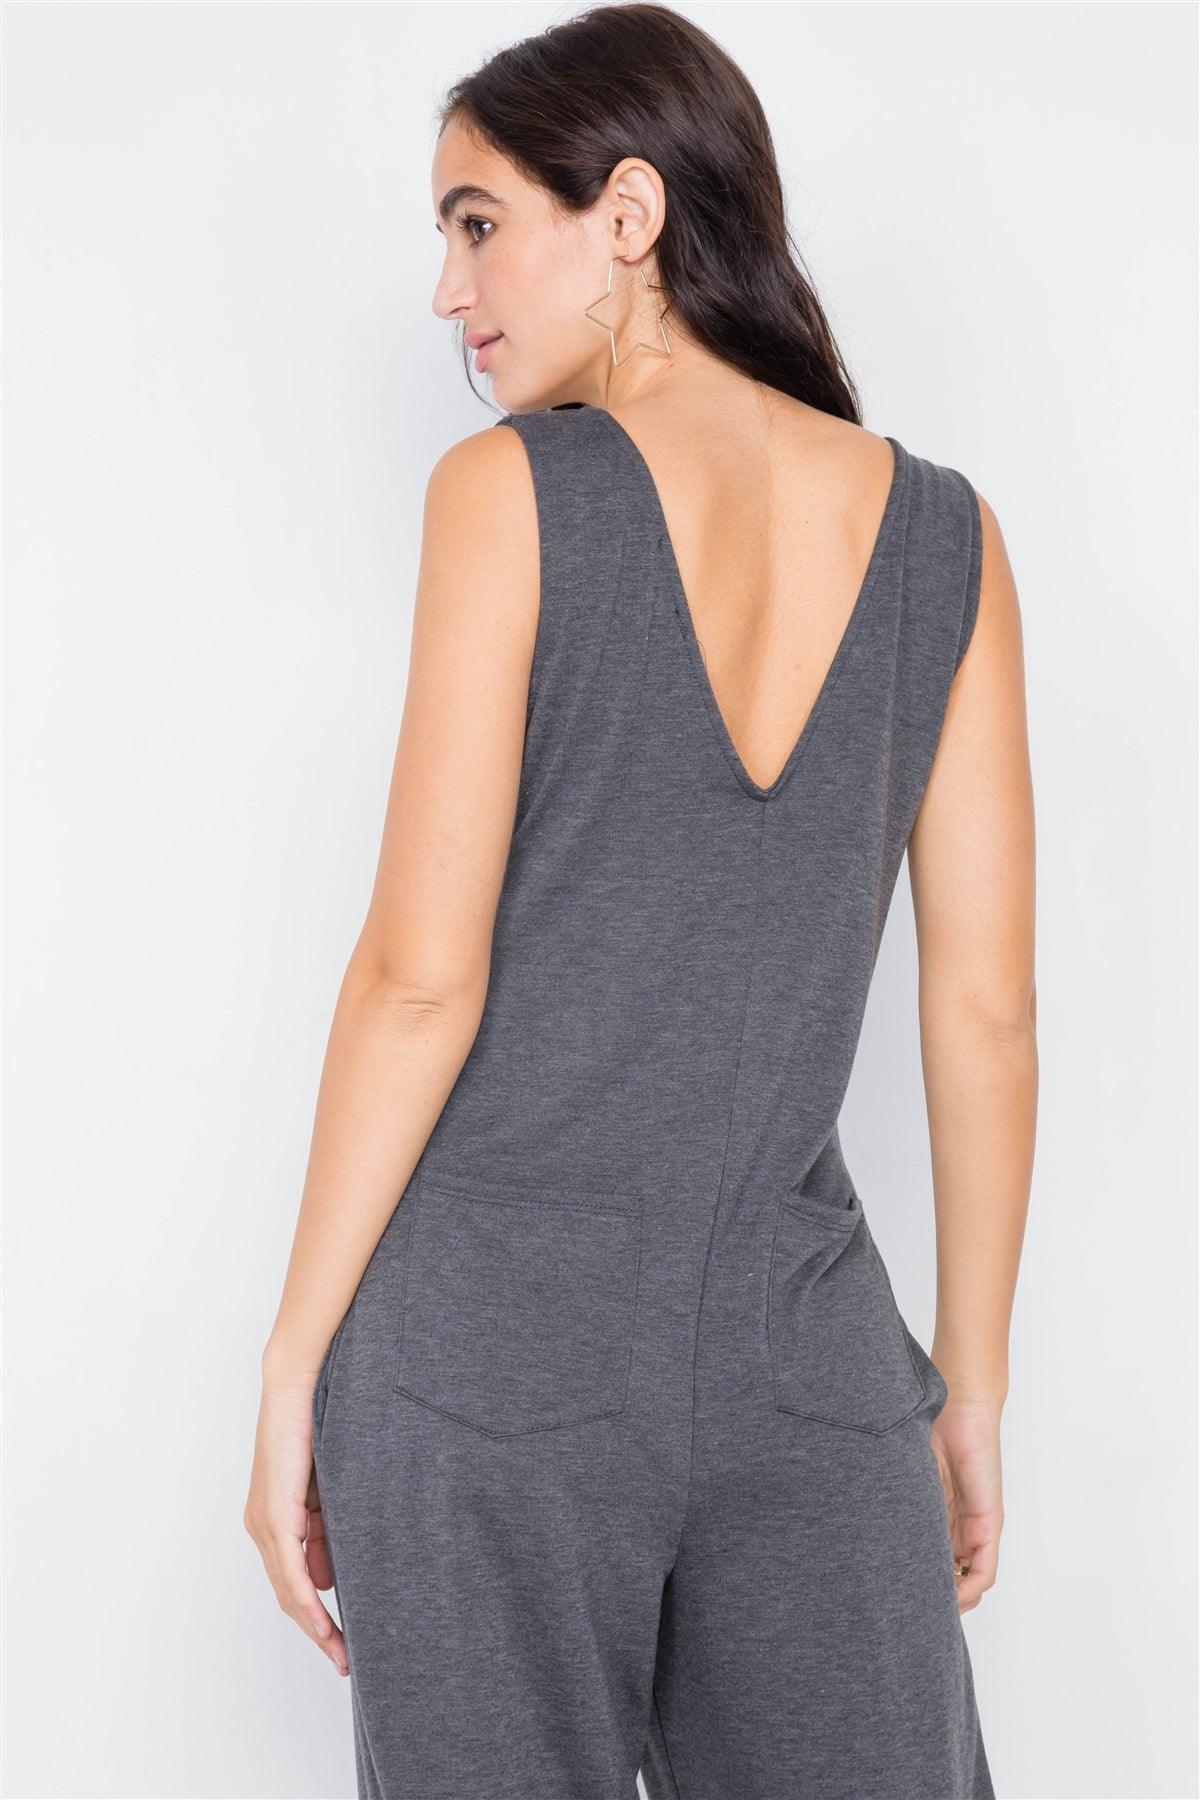 Charcoal Marled Knit Mock Wrap Ankle Length Jumpsuit /1-2-2